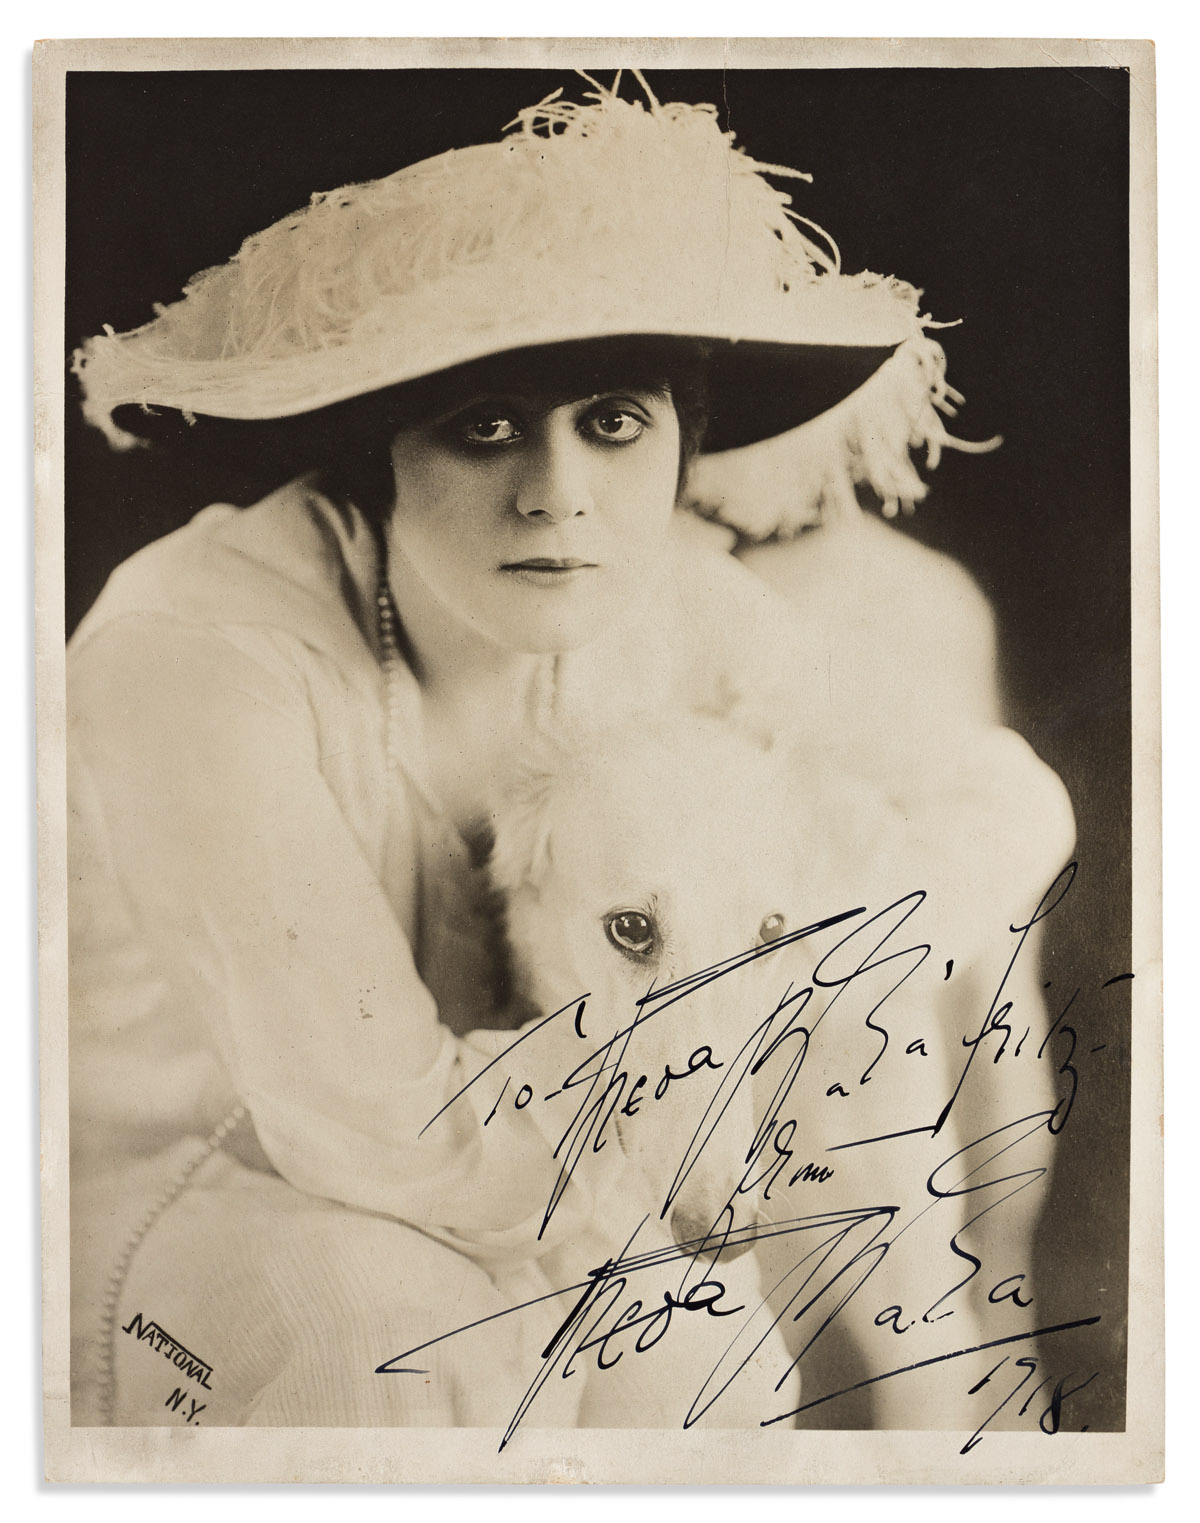 BARA, THEDA. Photograph Signed and Inscribed, to Theda Bara Fritz [a joke?], half-length portrait by National showing her in a broad-